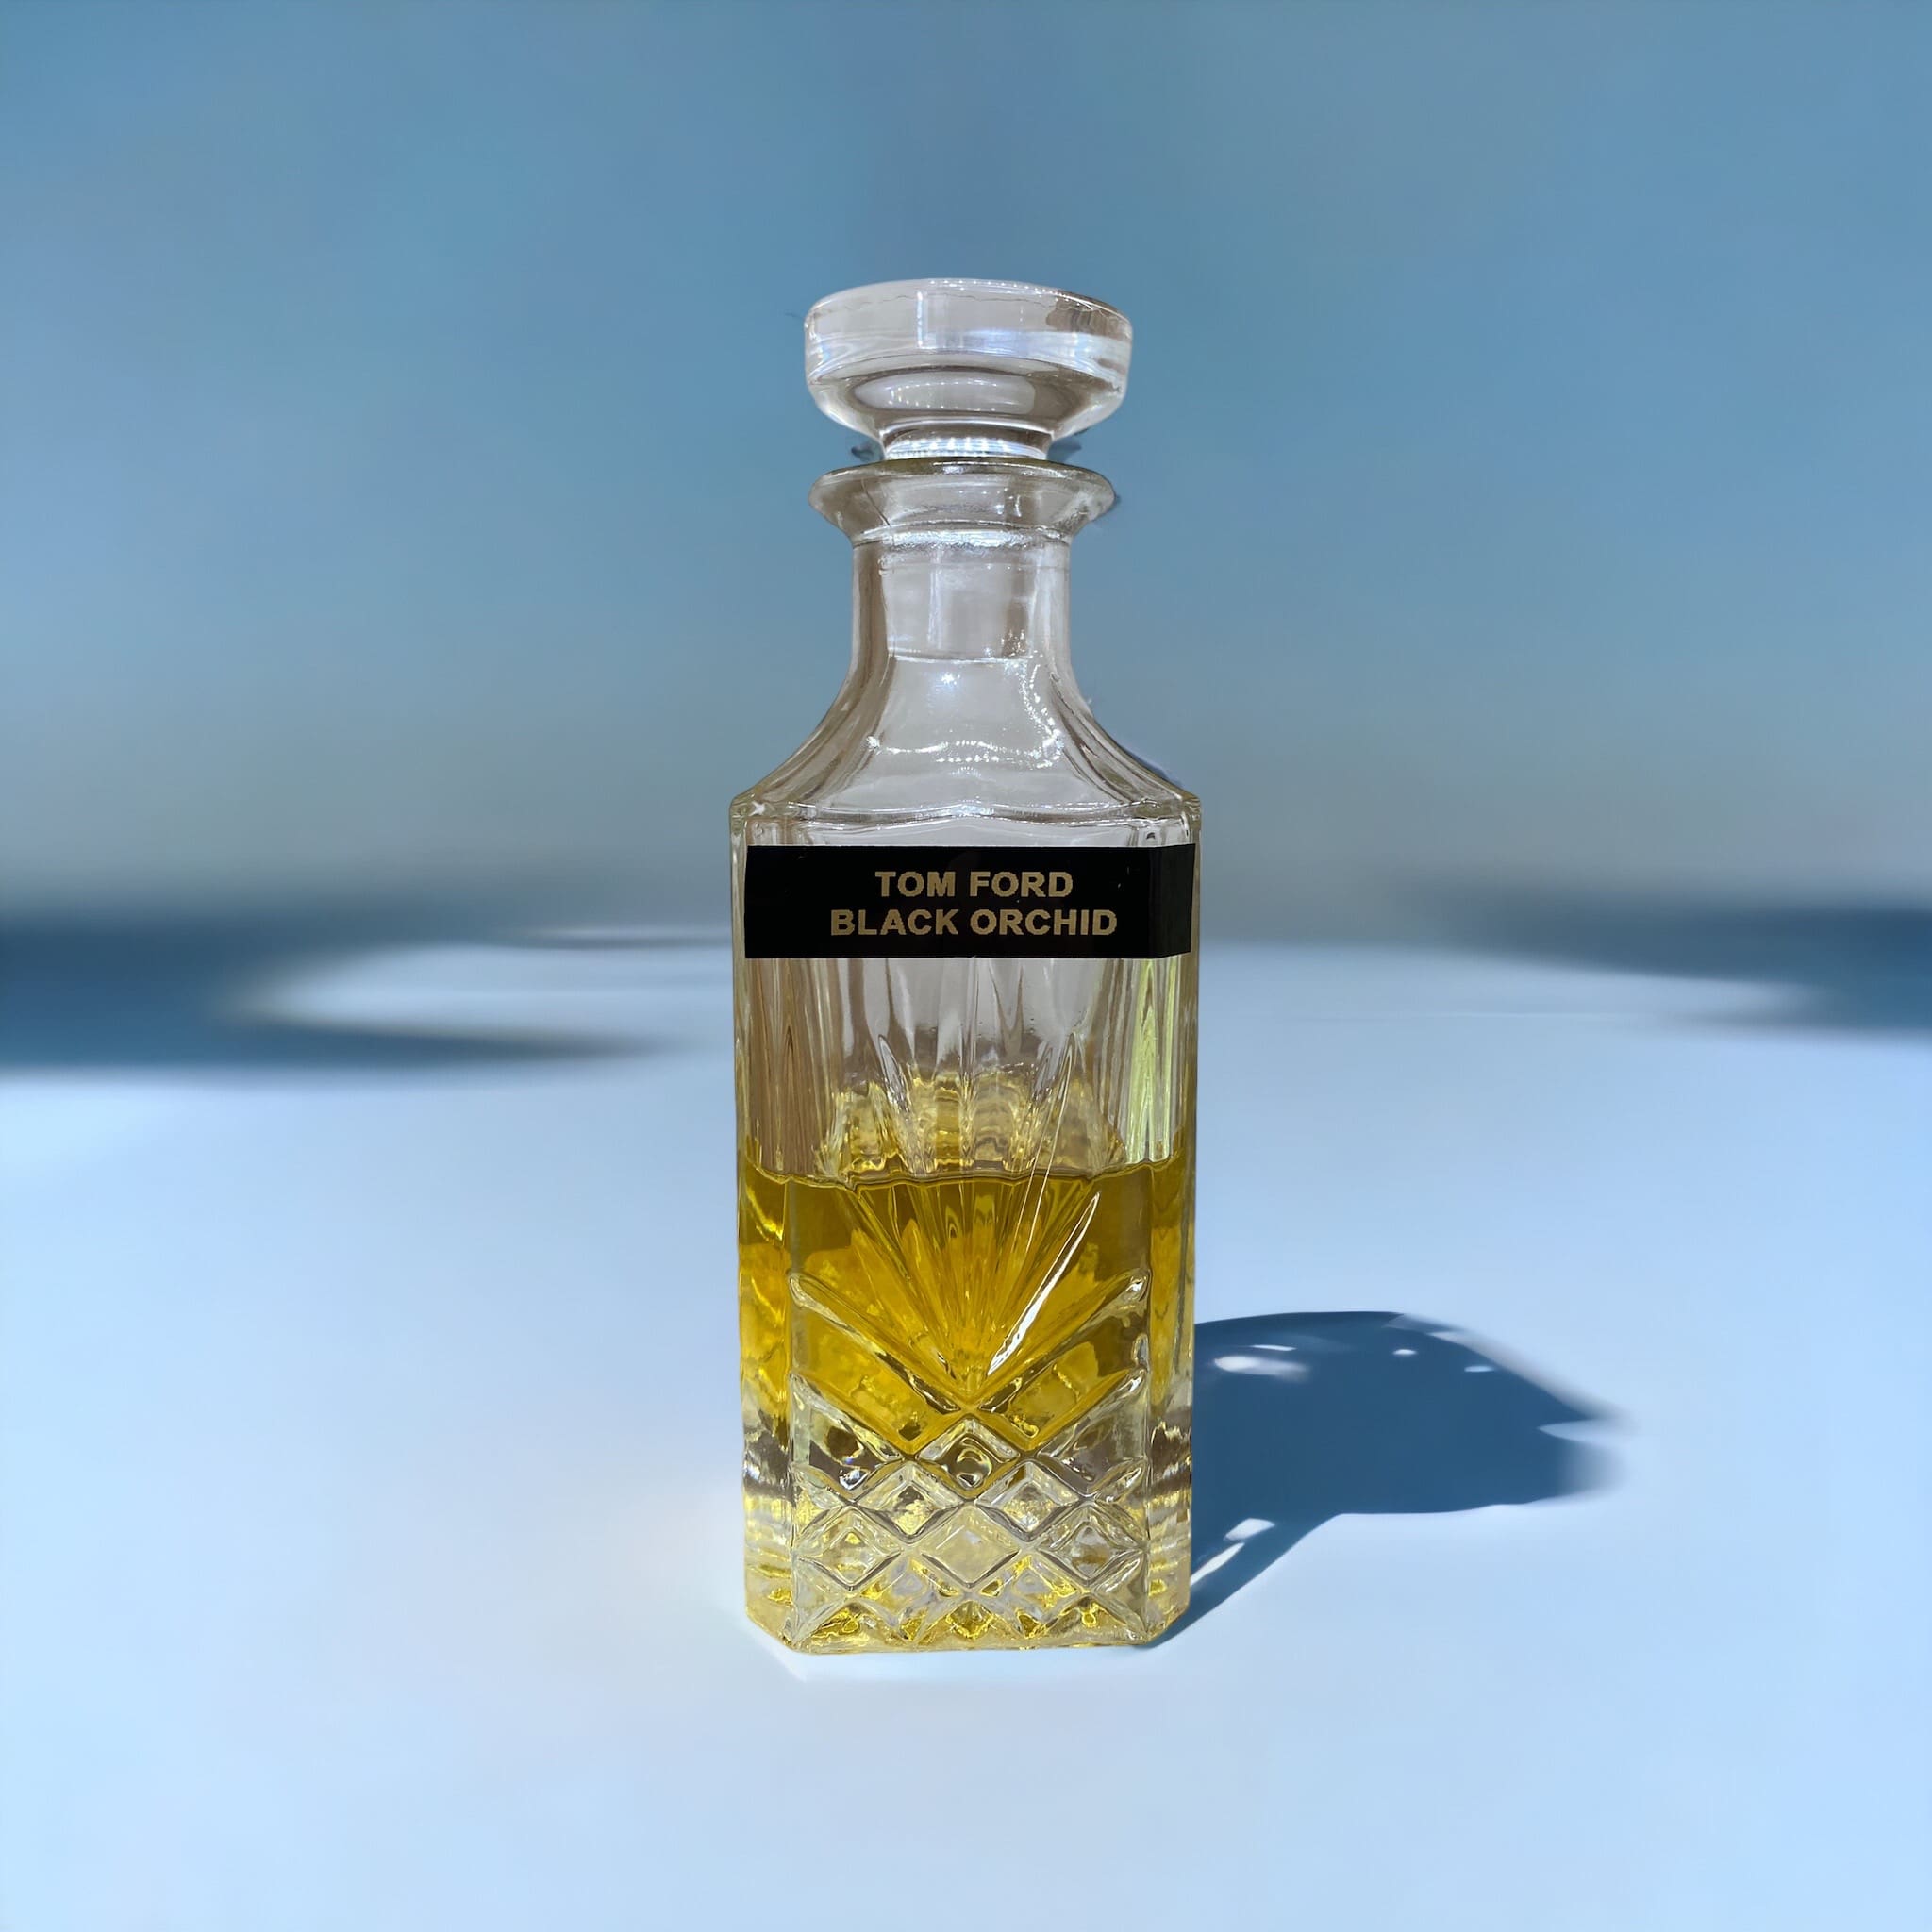 Tom ford black orchid 2020